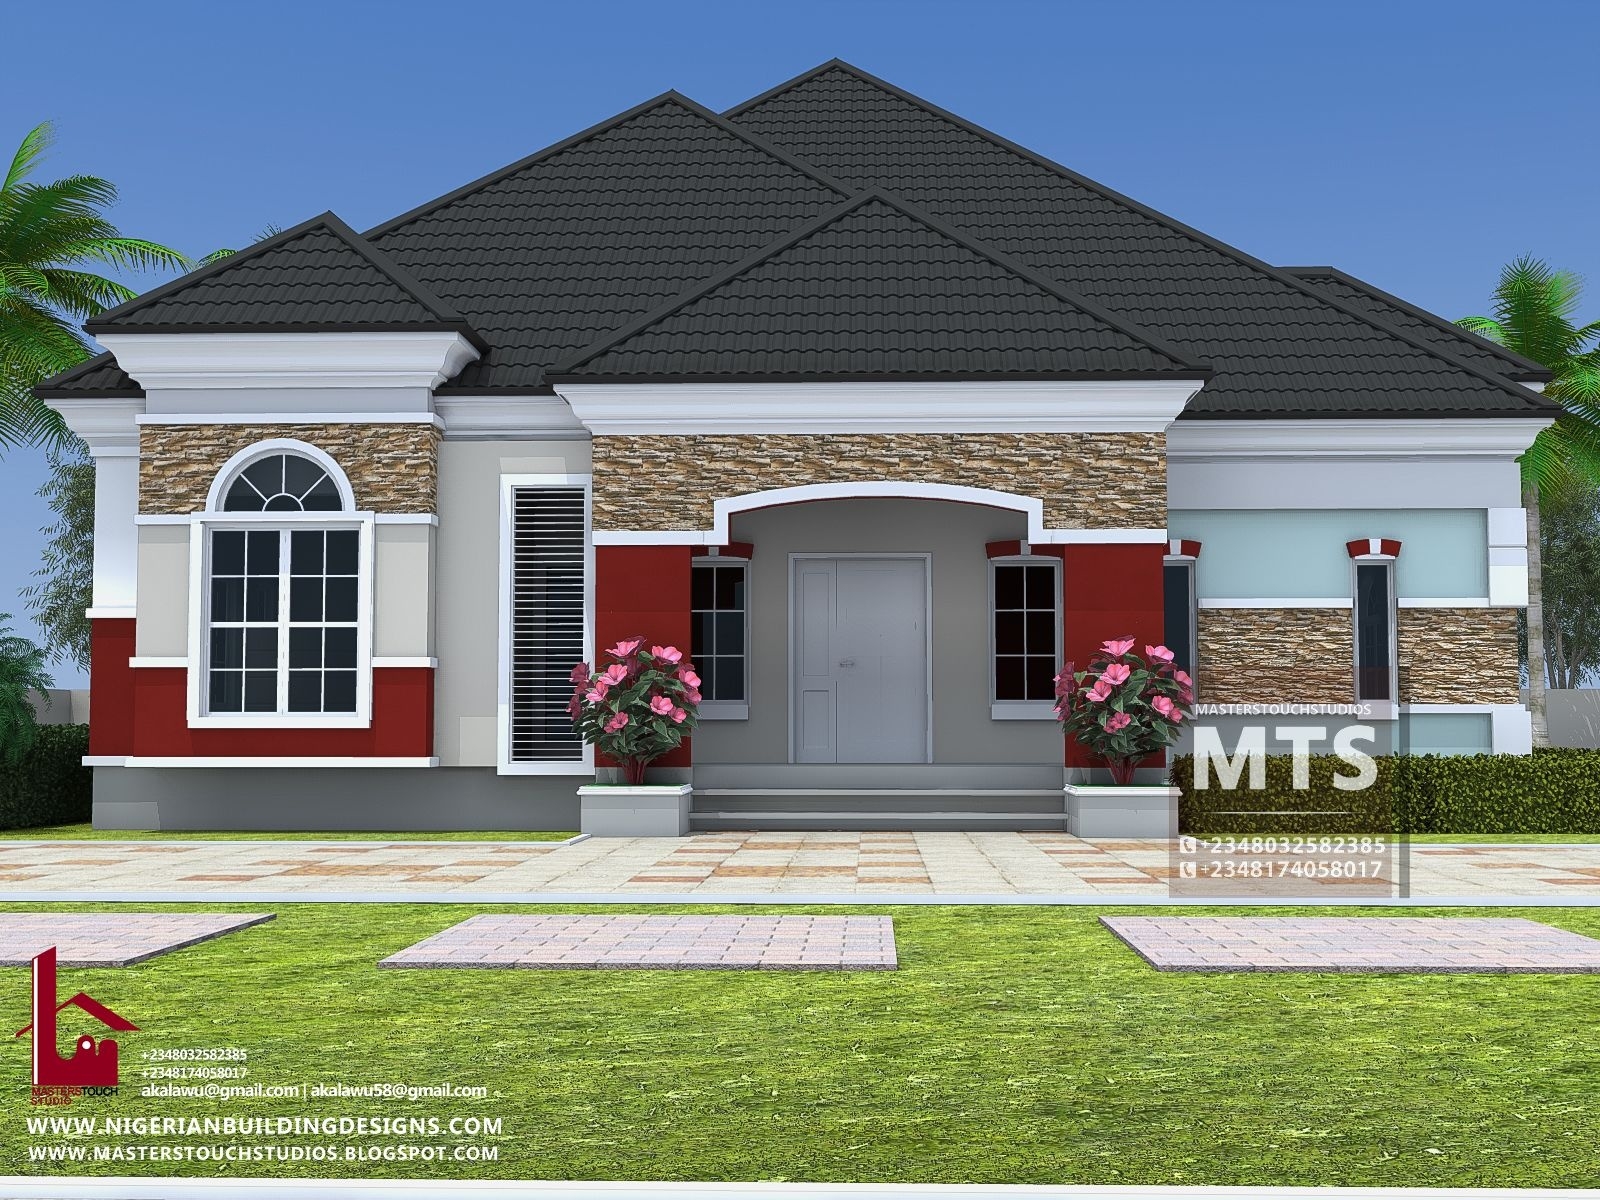 Image of bungalow exterior designs in nigeria within marvelous 4 bedroom bungalow house plans in nigeria